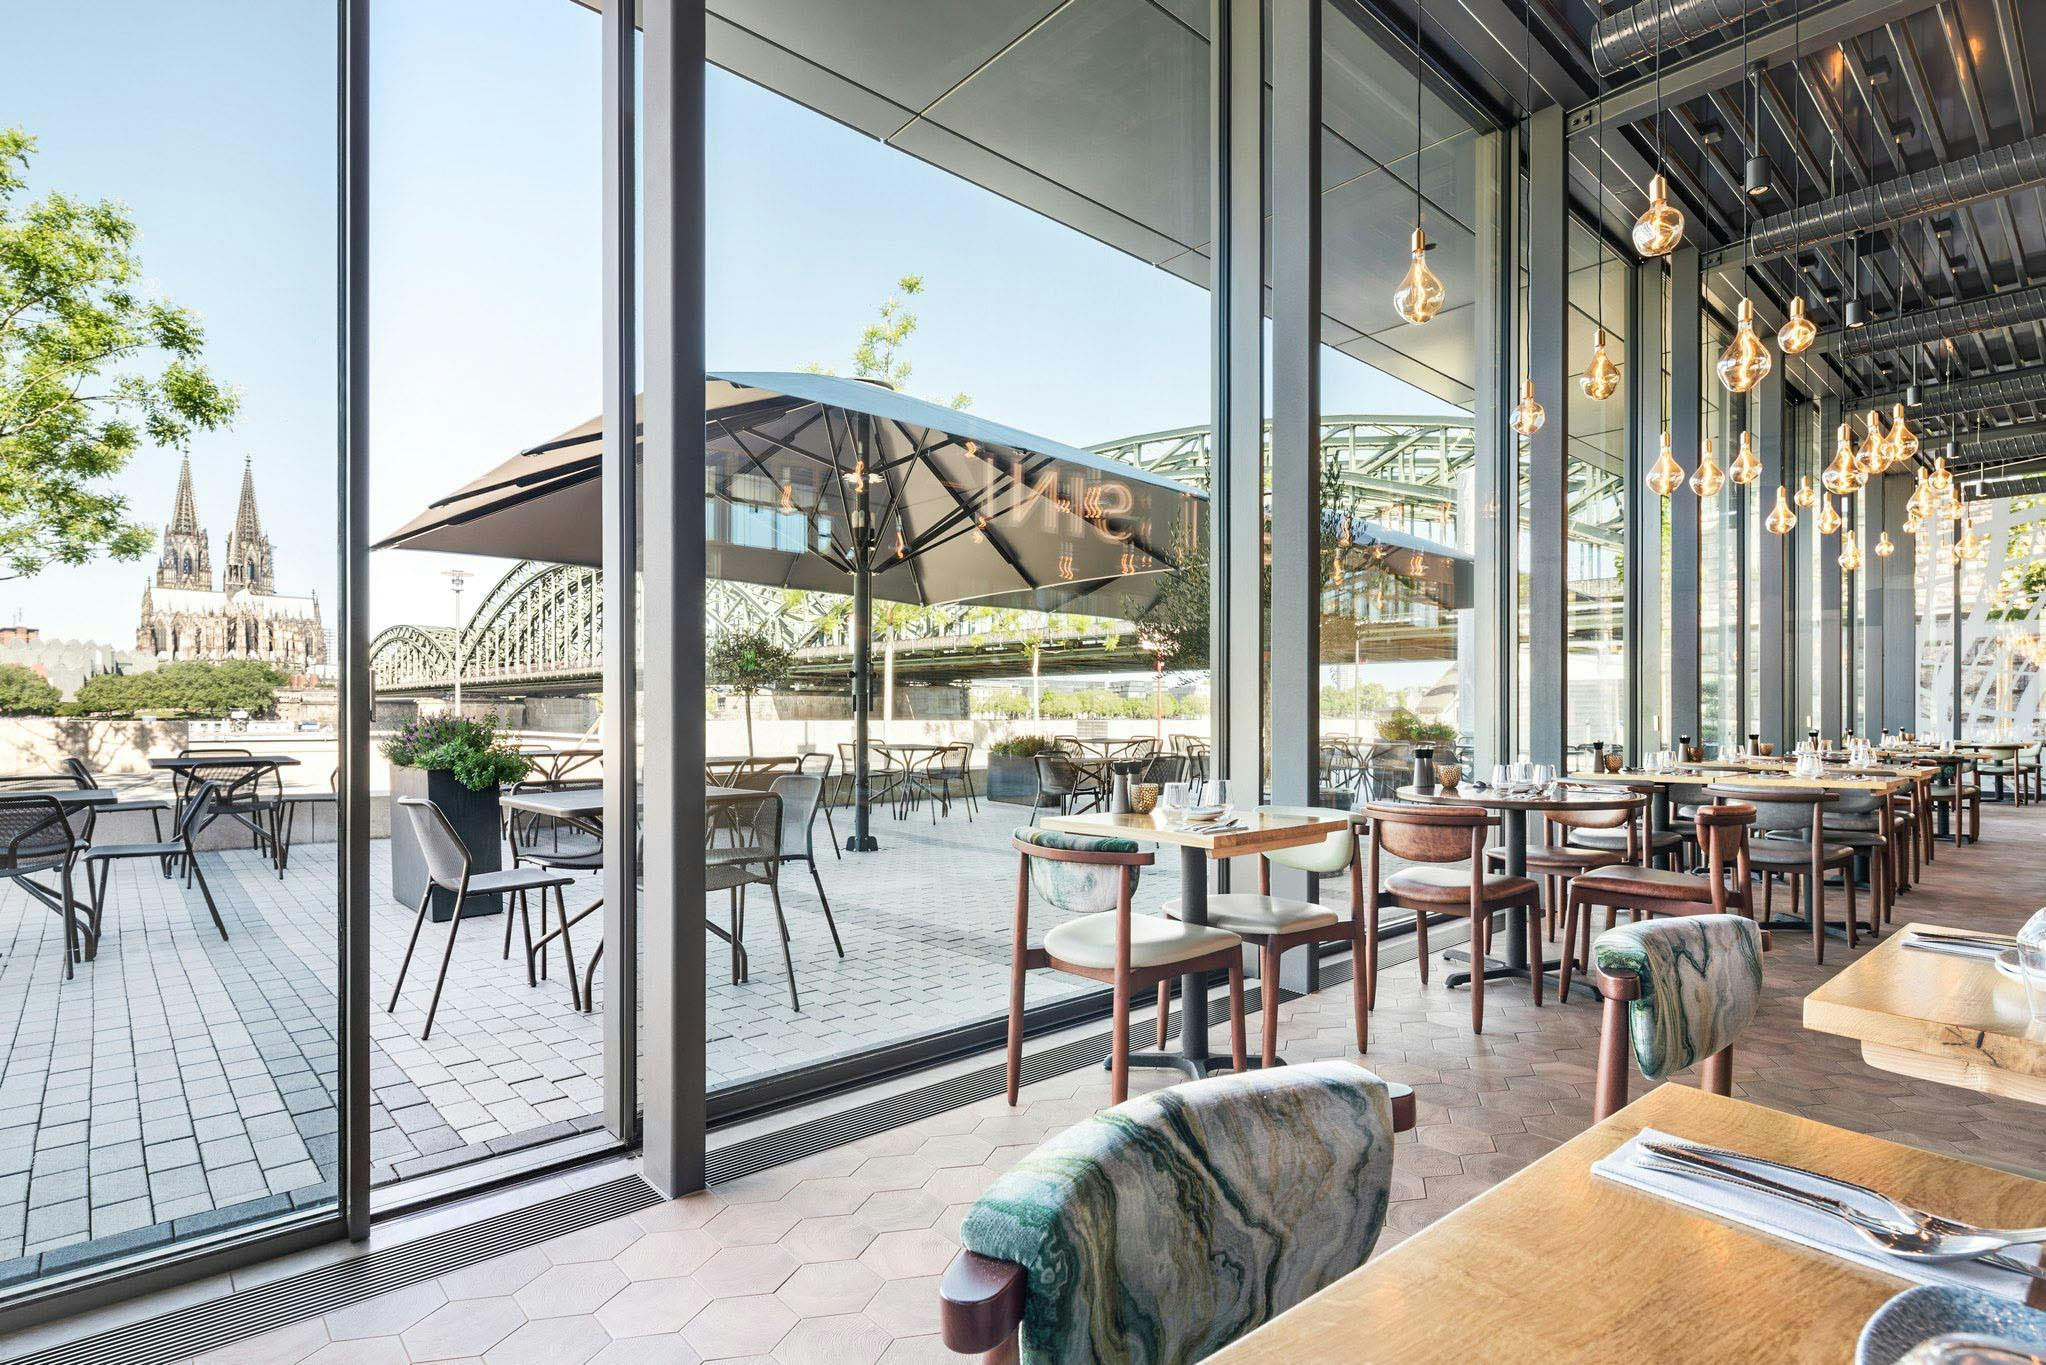 restaurant spaces designed with minimal sliding glass walls for fresh air and daylight